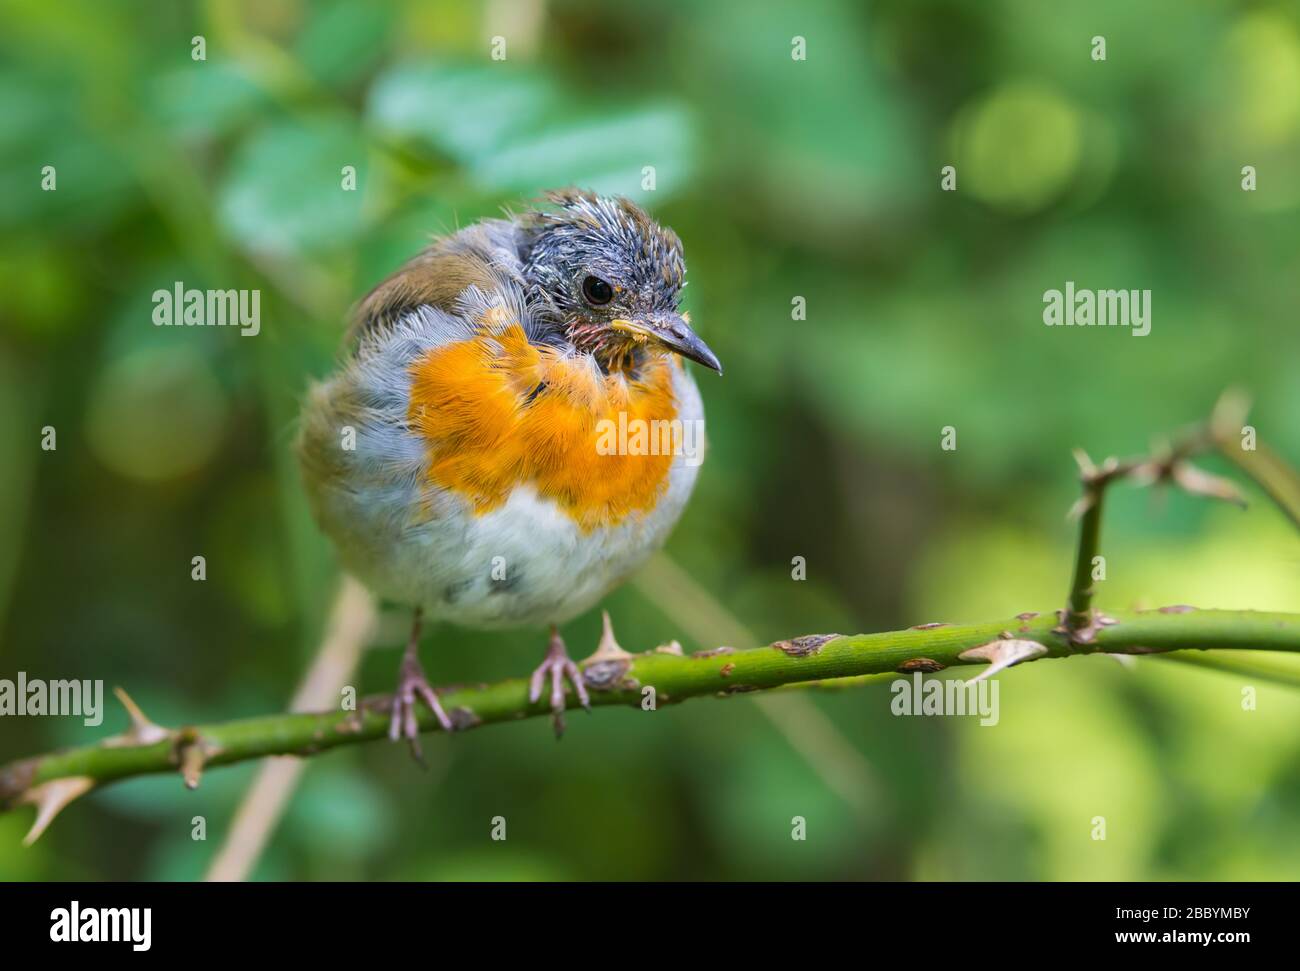 European Robin (Erithacus rubecula) in moult, perched on a twig in Summer in West Sussex, England, UK. Robin moulting, losing feathers. Stock Photo